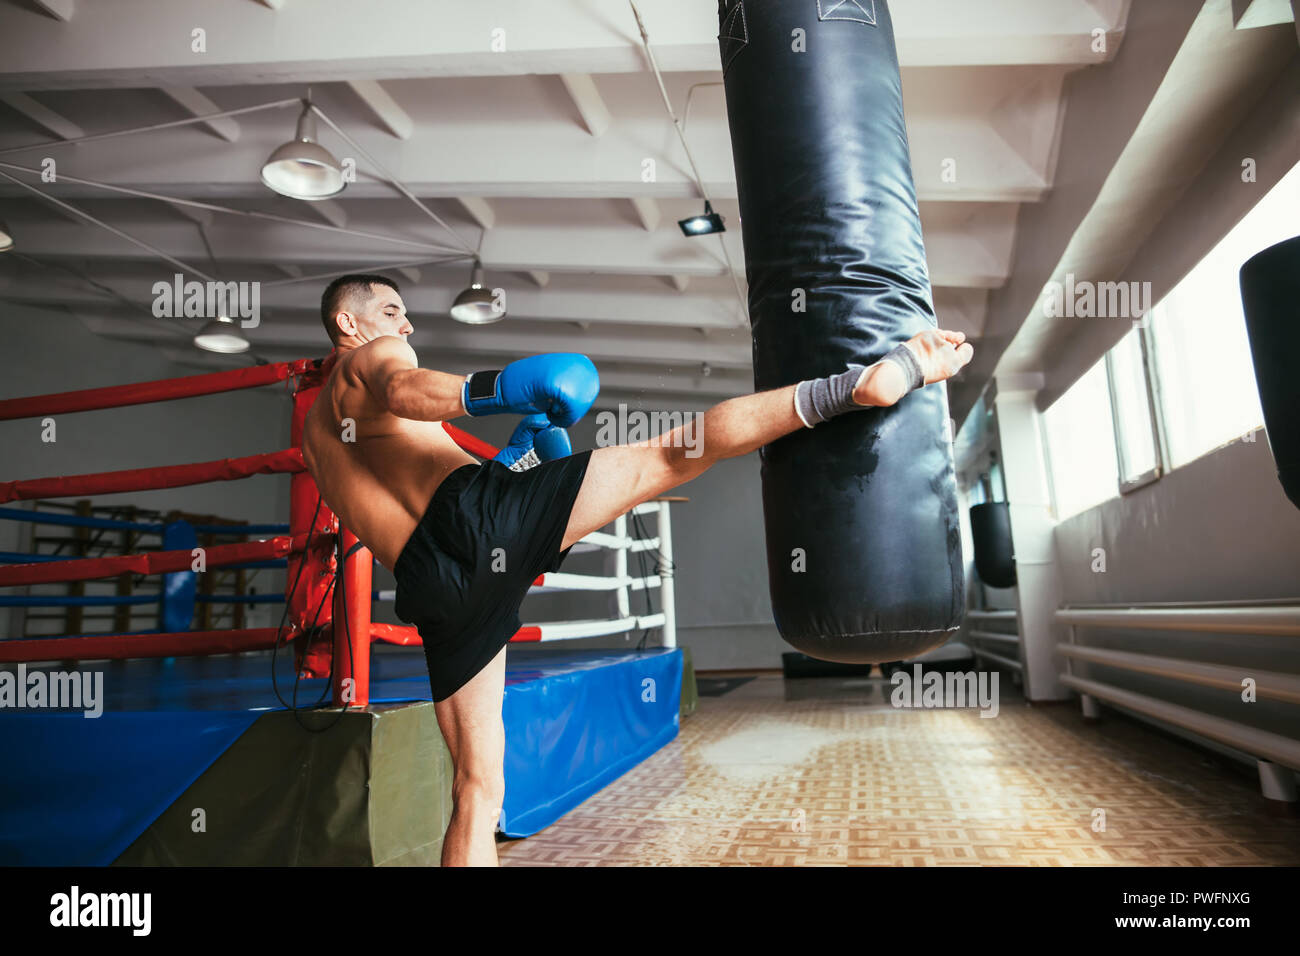 Male boxer workout high kick on the punching bag in gym. Sport concept Stock Photo